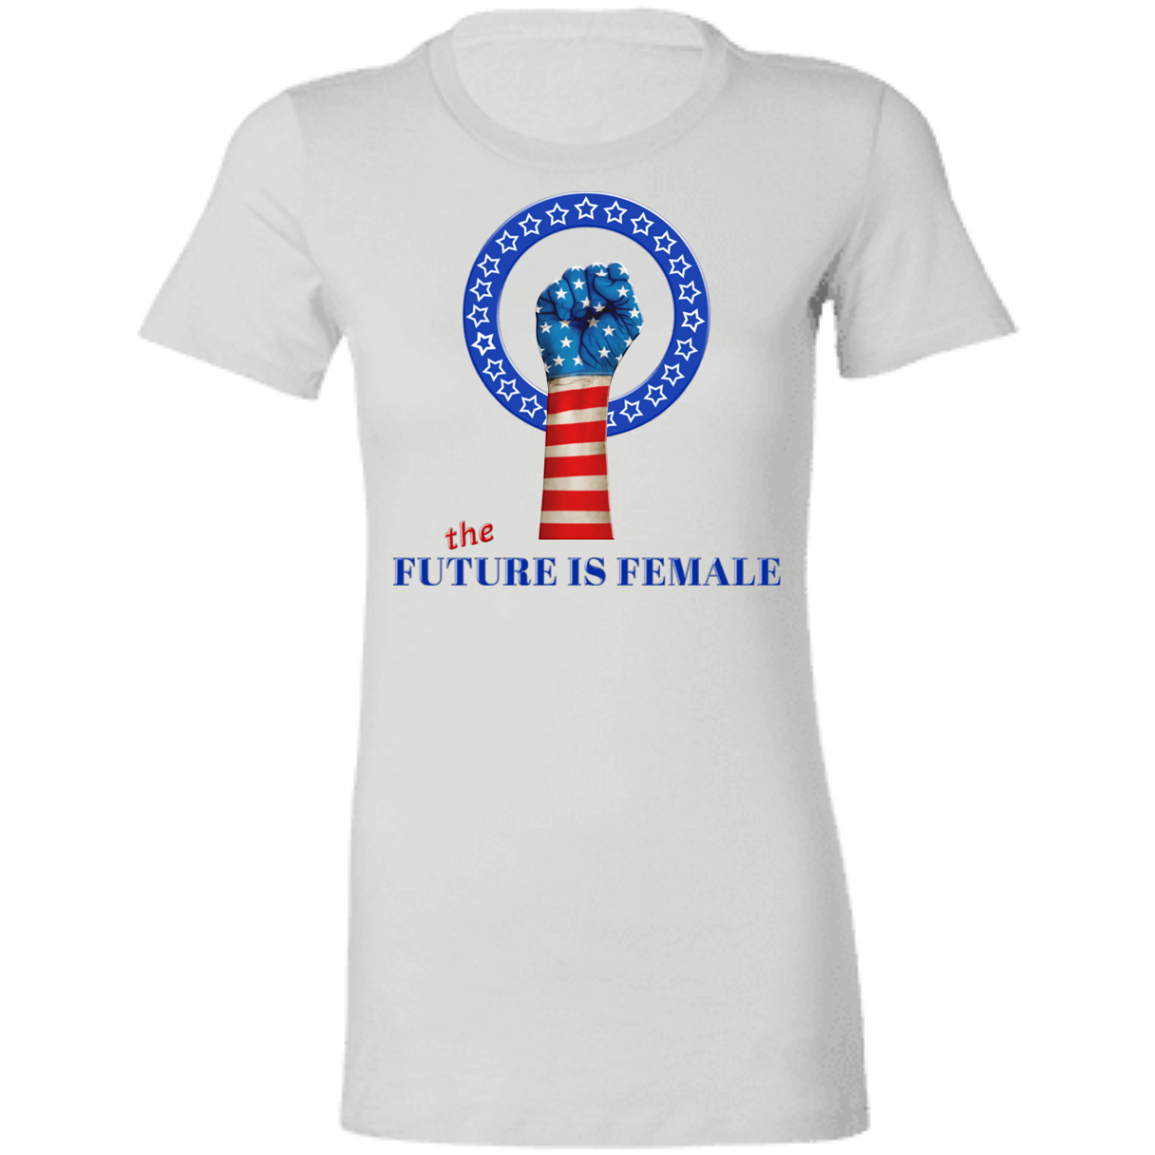 The Future Is Female - Women's Fitted T-Shirt